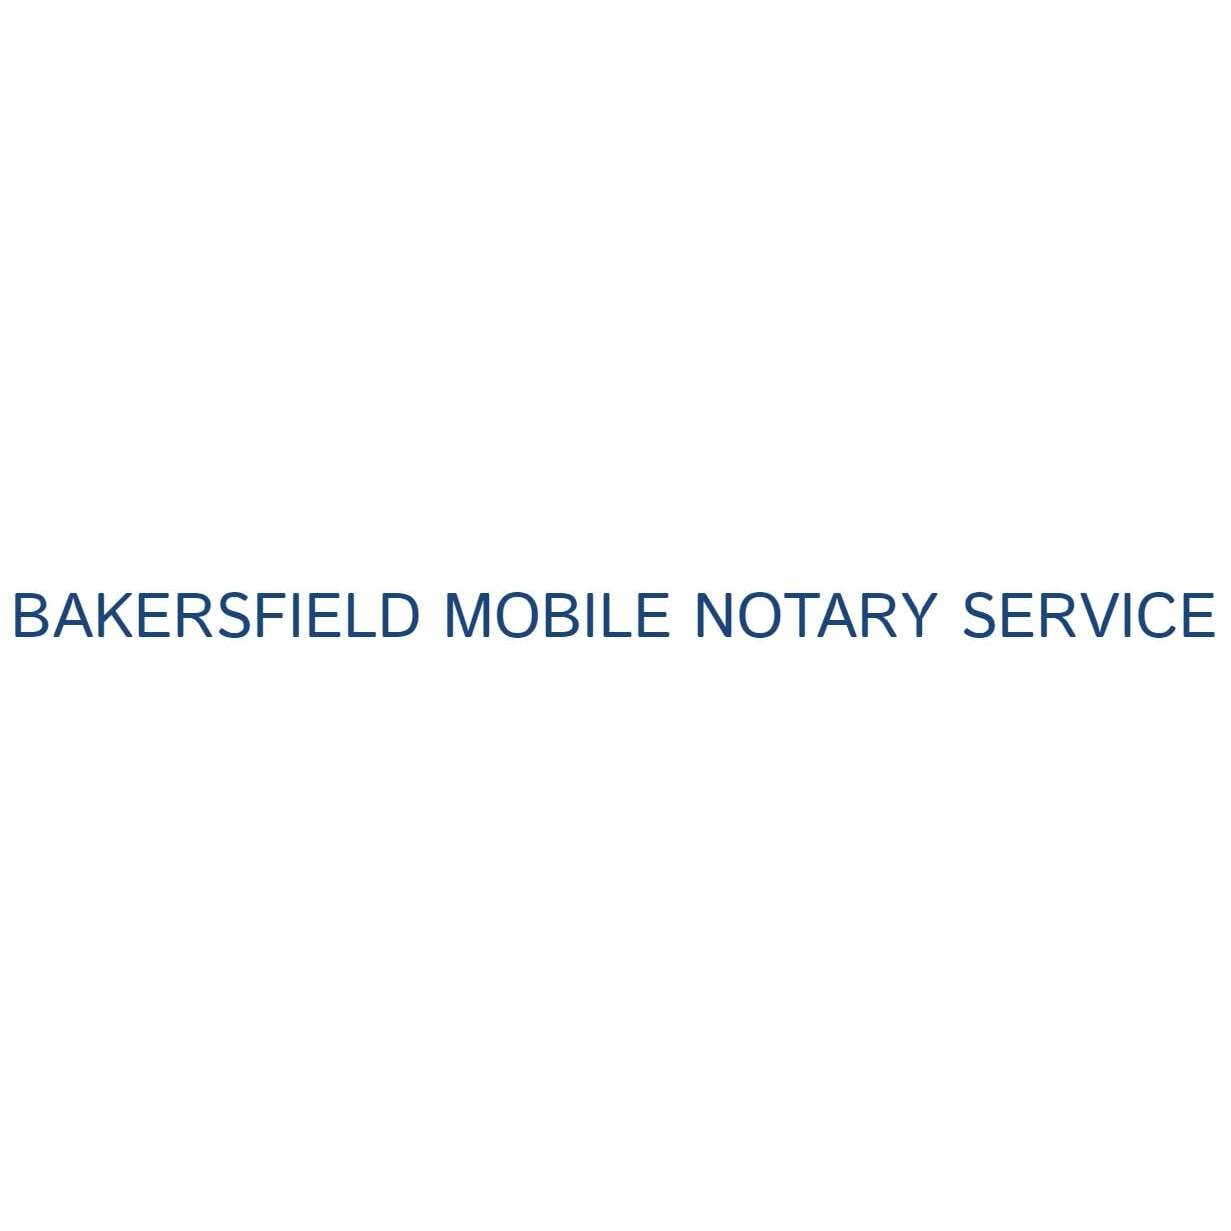 Bakersfield Mobile Notary Service - Bakersfield, CA 93309 - (661)322-9638 | ShowMeLocal.com